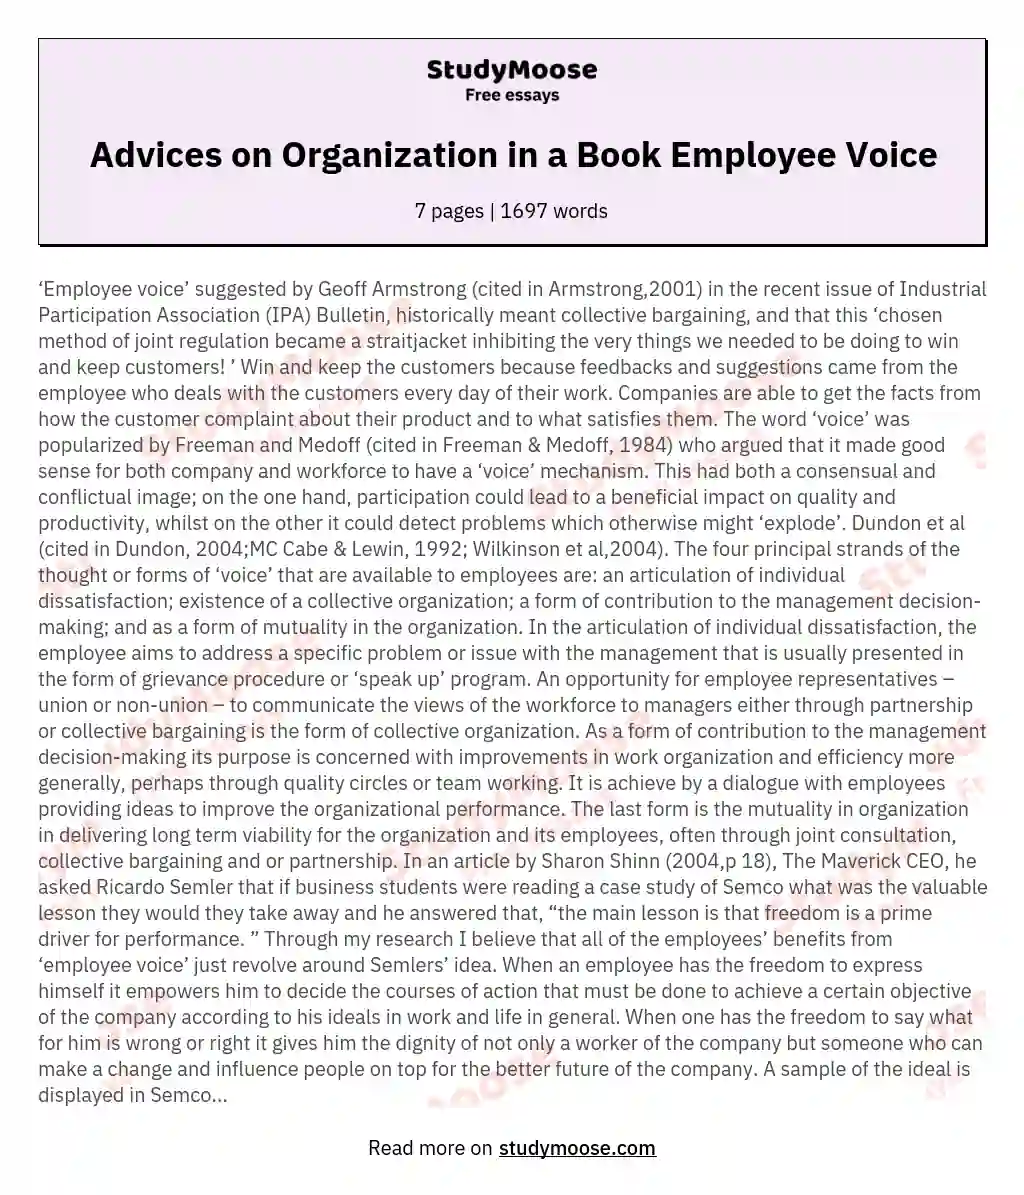 Advices on Organization in a Book Employee Voice essay